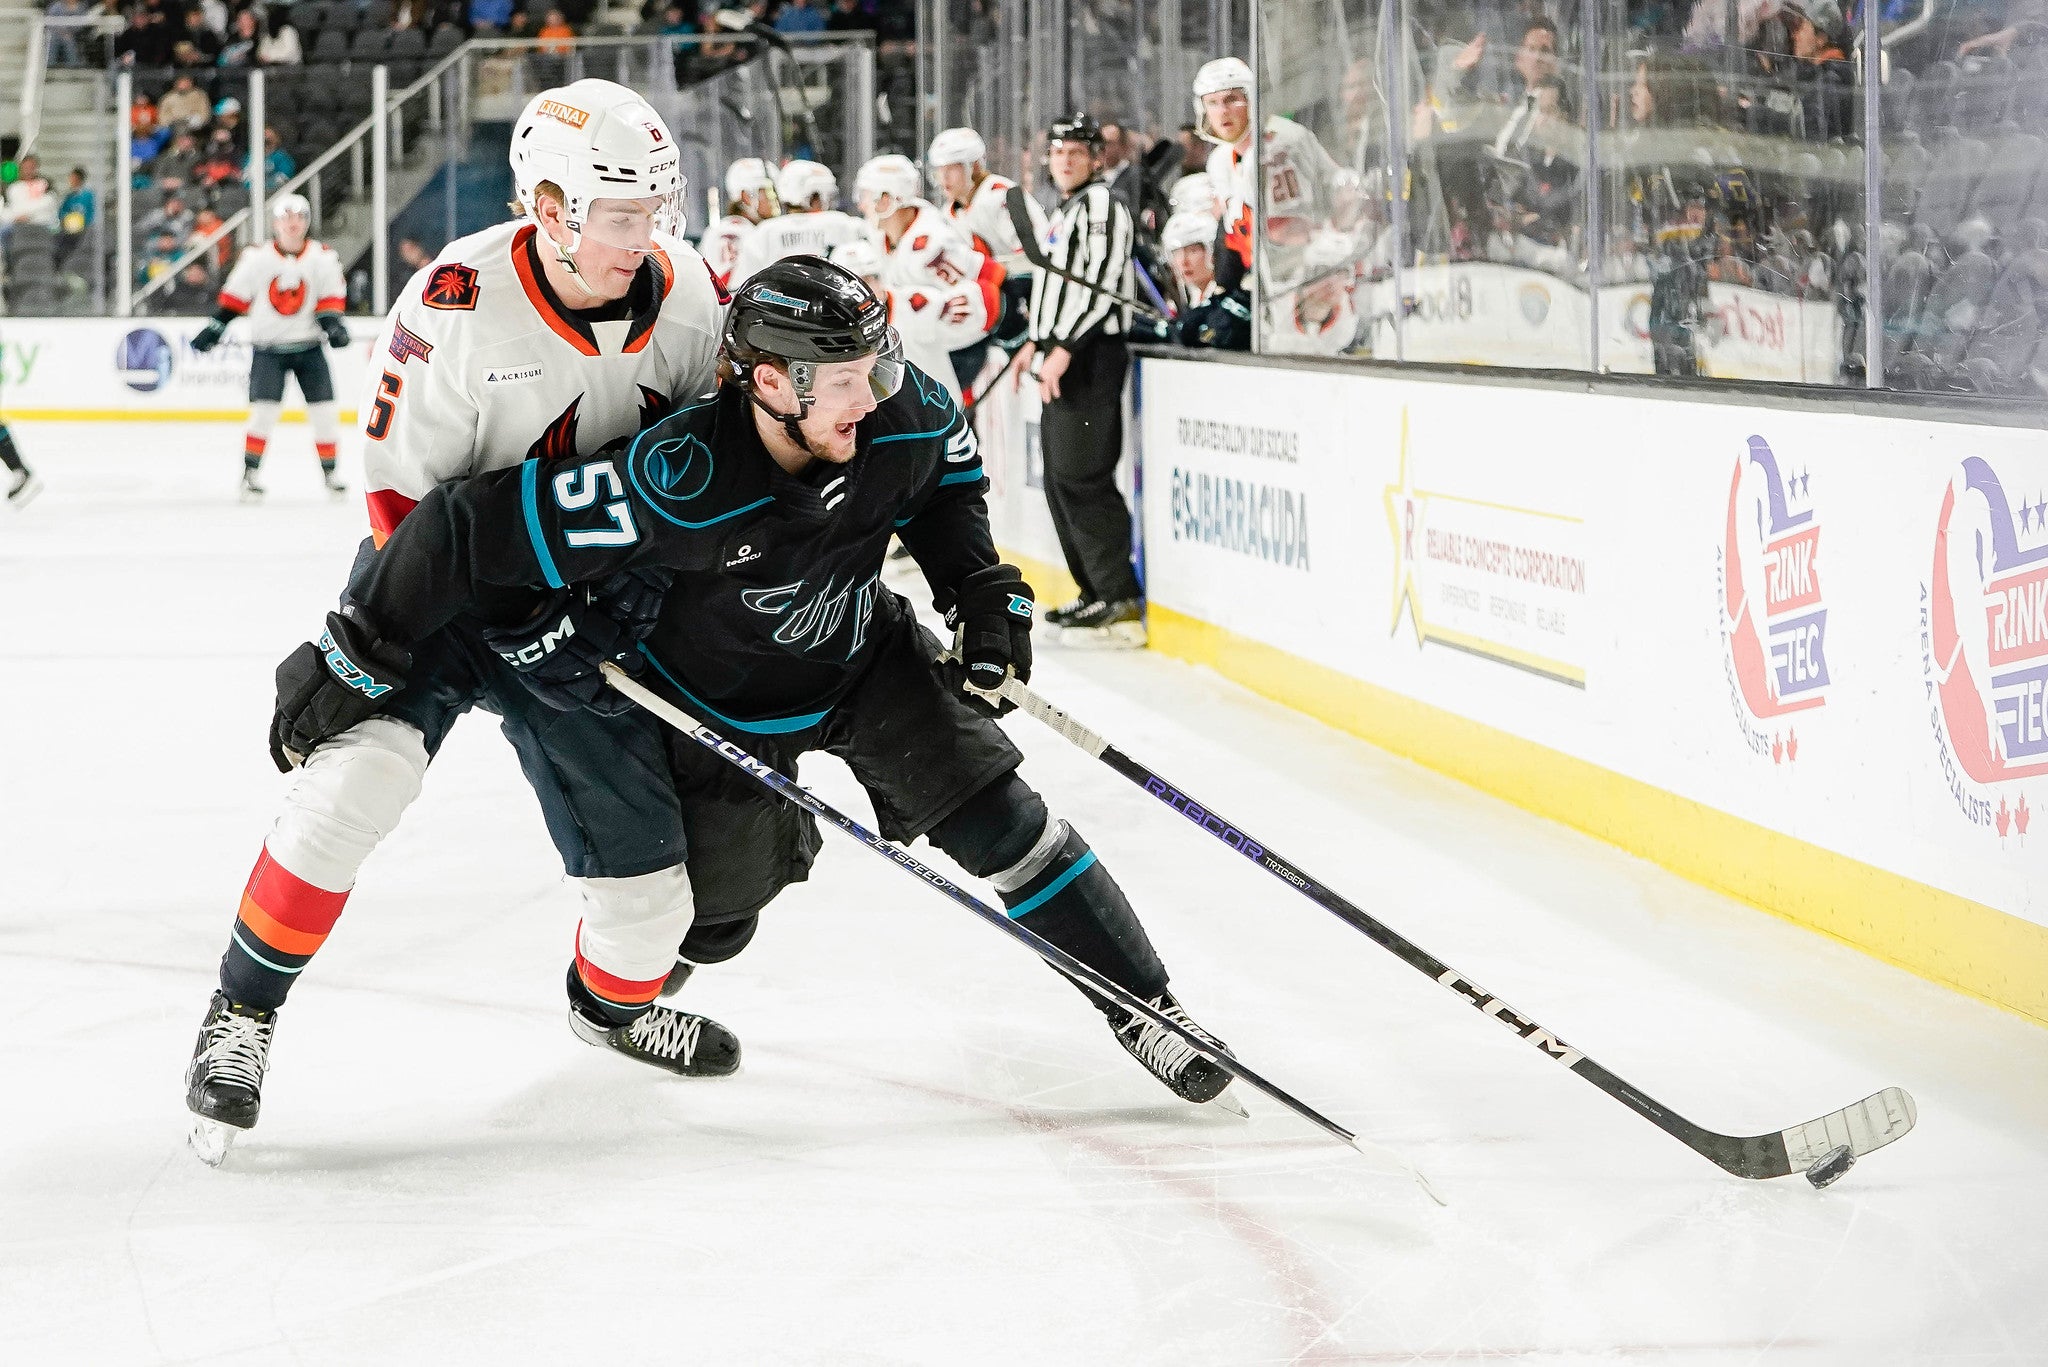 Roadrunners rally comes up short in 4-3 loss to San Jose; regular-season  finale Saturday at Tucson Arena, then playoffs